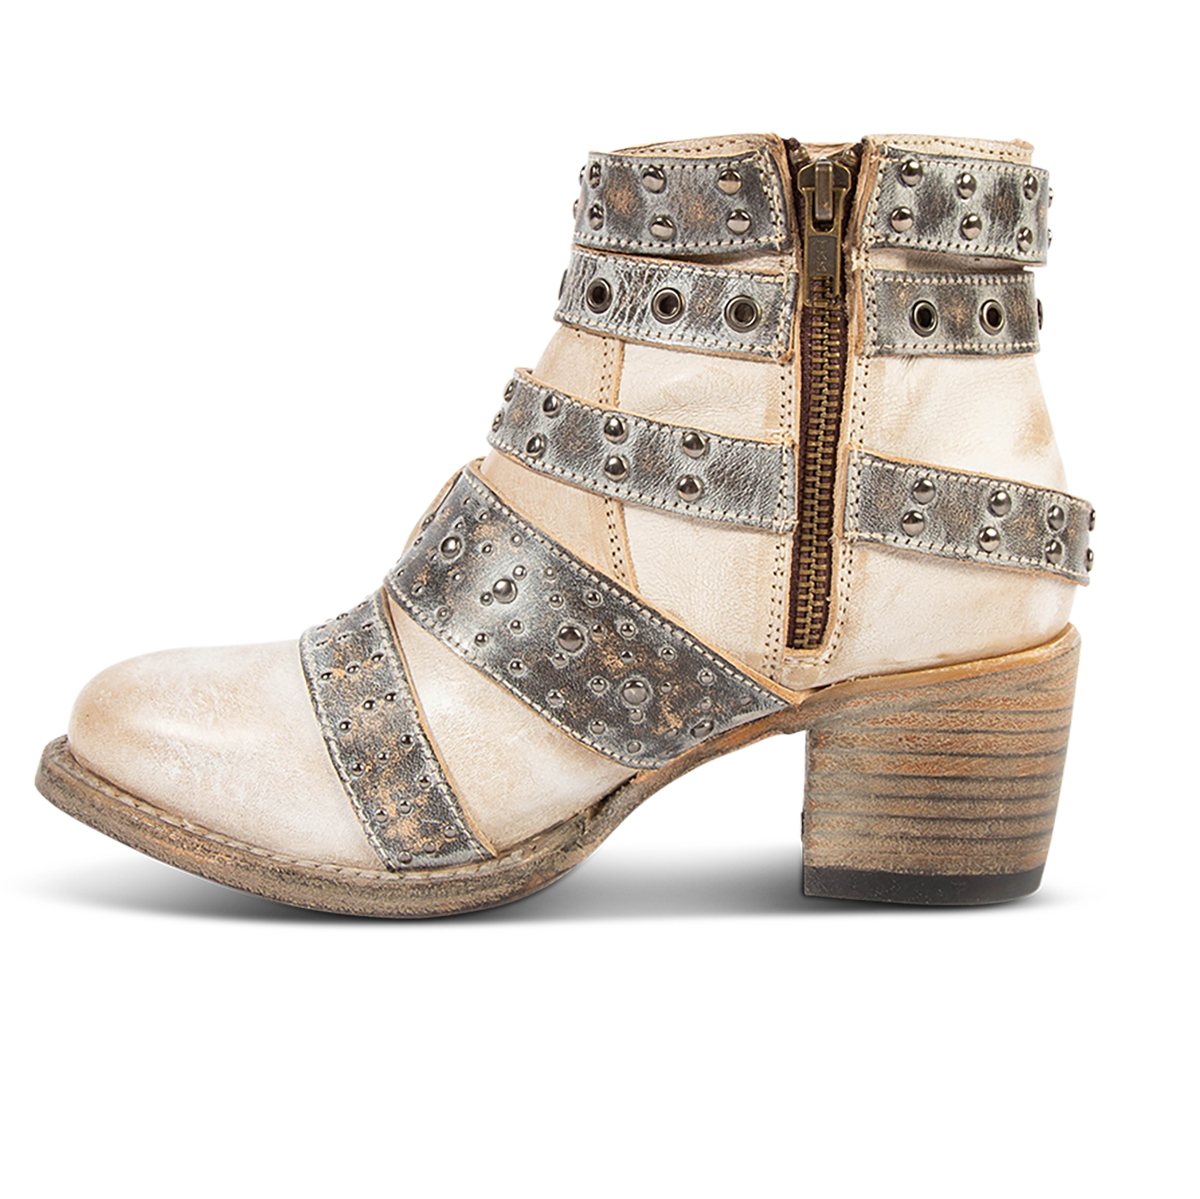 Inside view showing zip closure on FREEBIRD women's Slayer ice-multi leather ankle bootie